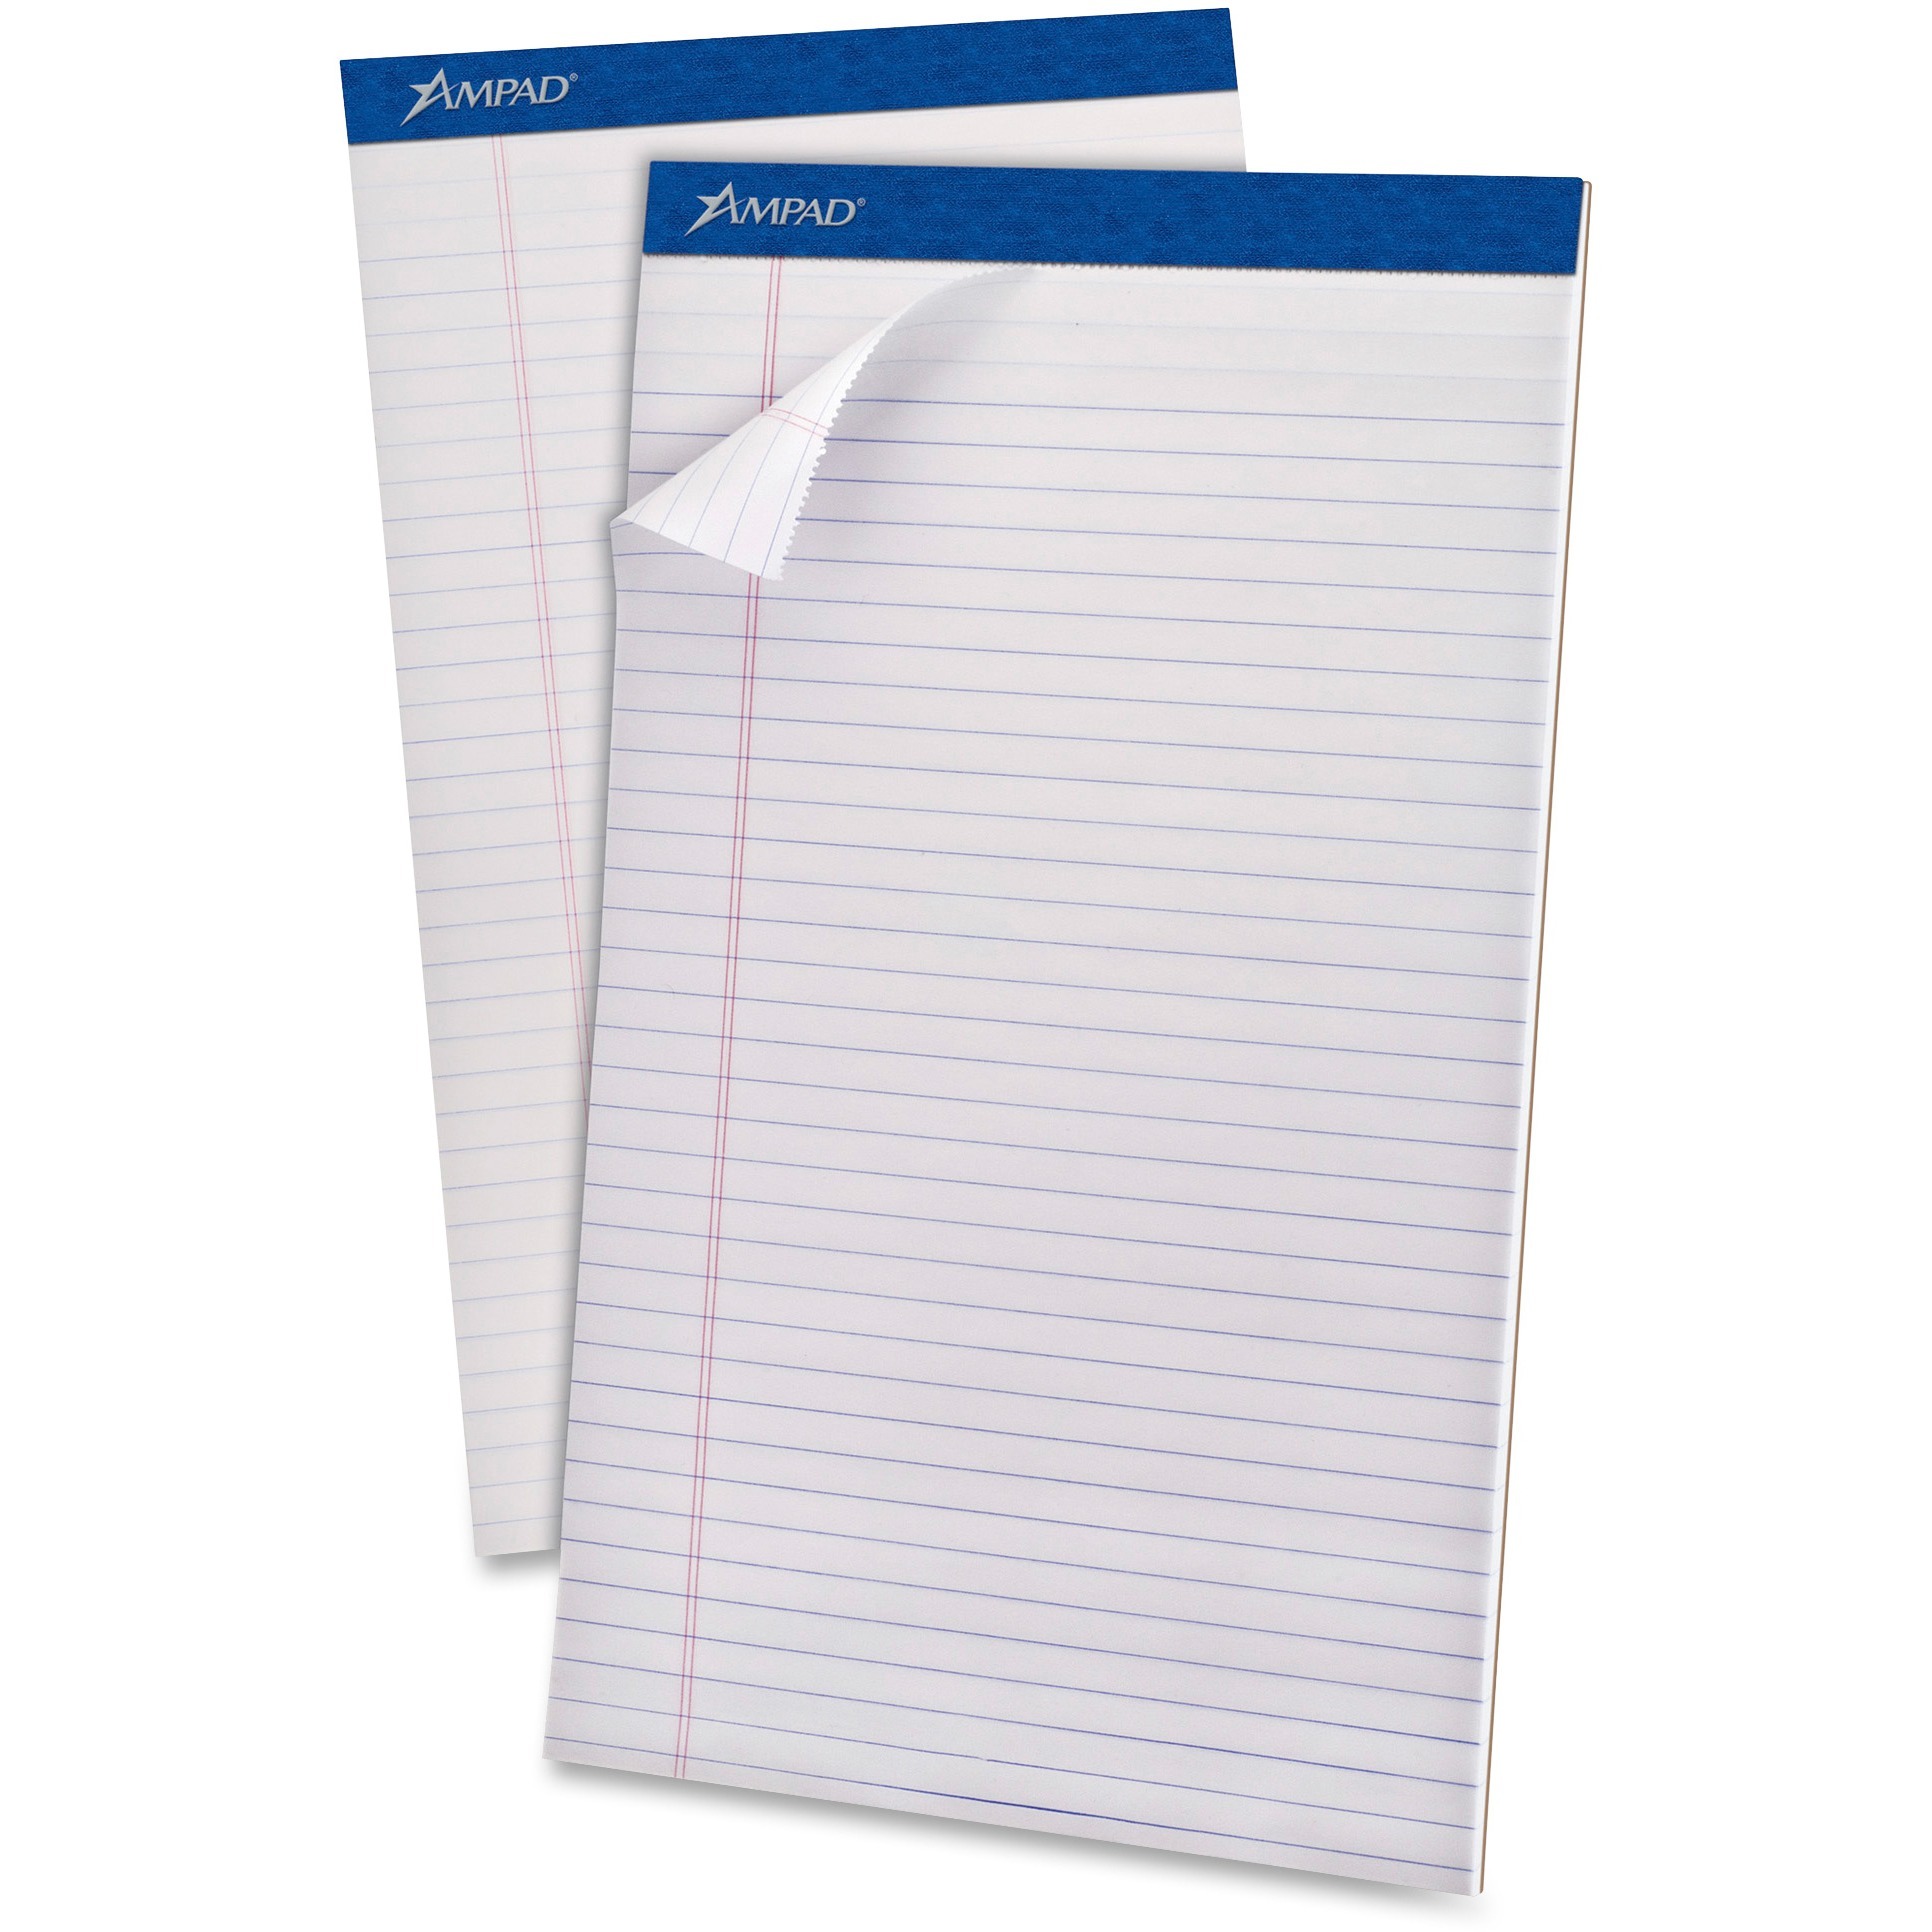 Ampad Perforated Ruled Pads - Legal - 50 Sheets - Stapled - 0.34" Ruled - 20 lb Basis Weight - Legal - 8 1/2" x 14" - White Pape